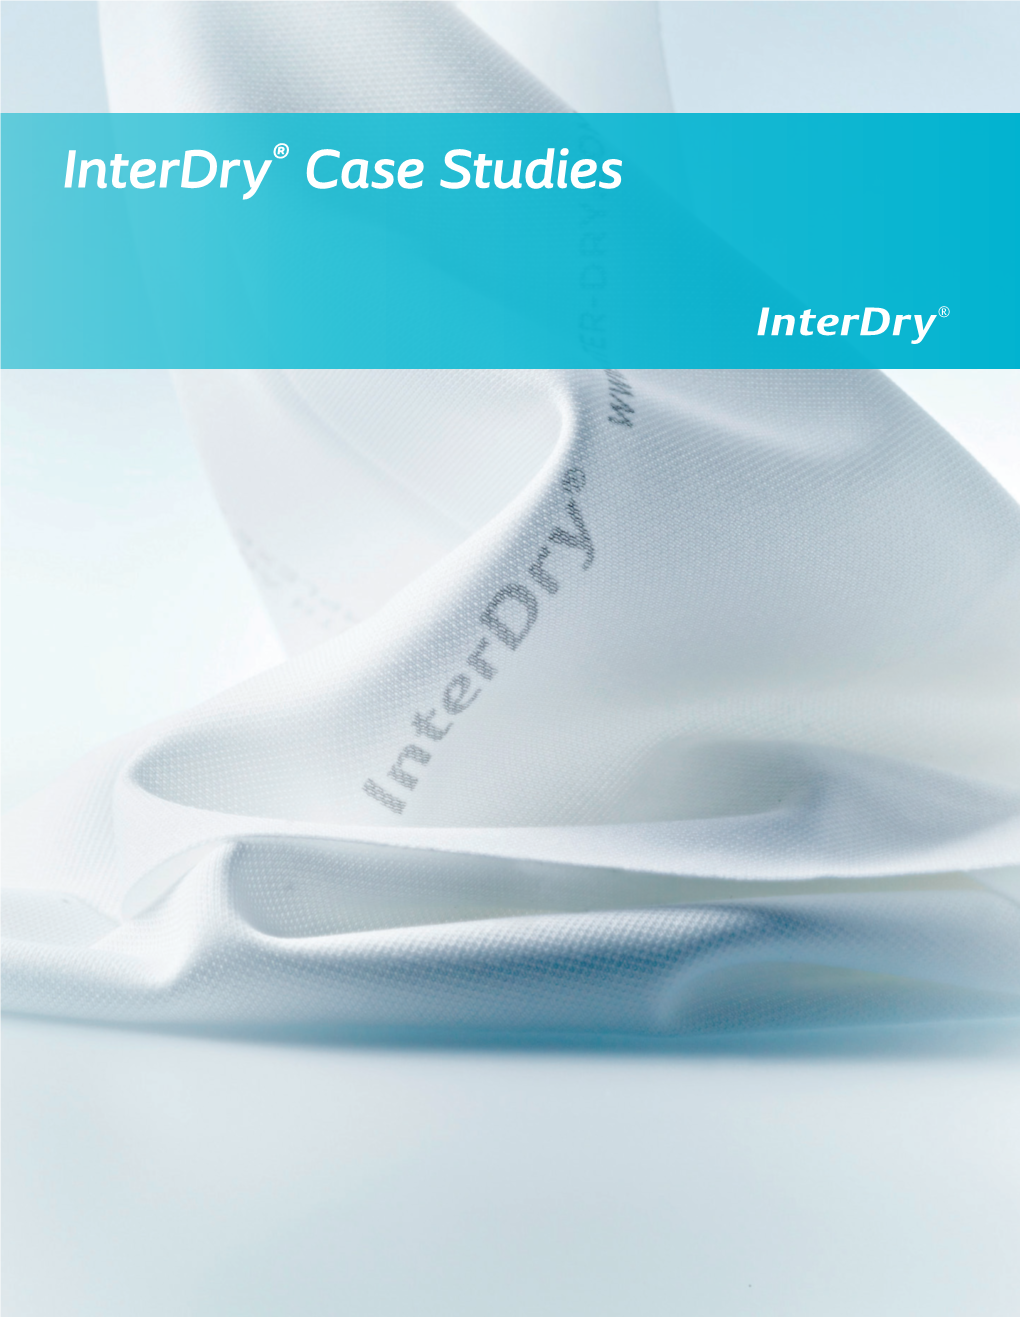 Interdry® Case Studies the Challenges of Skin Fold Management